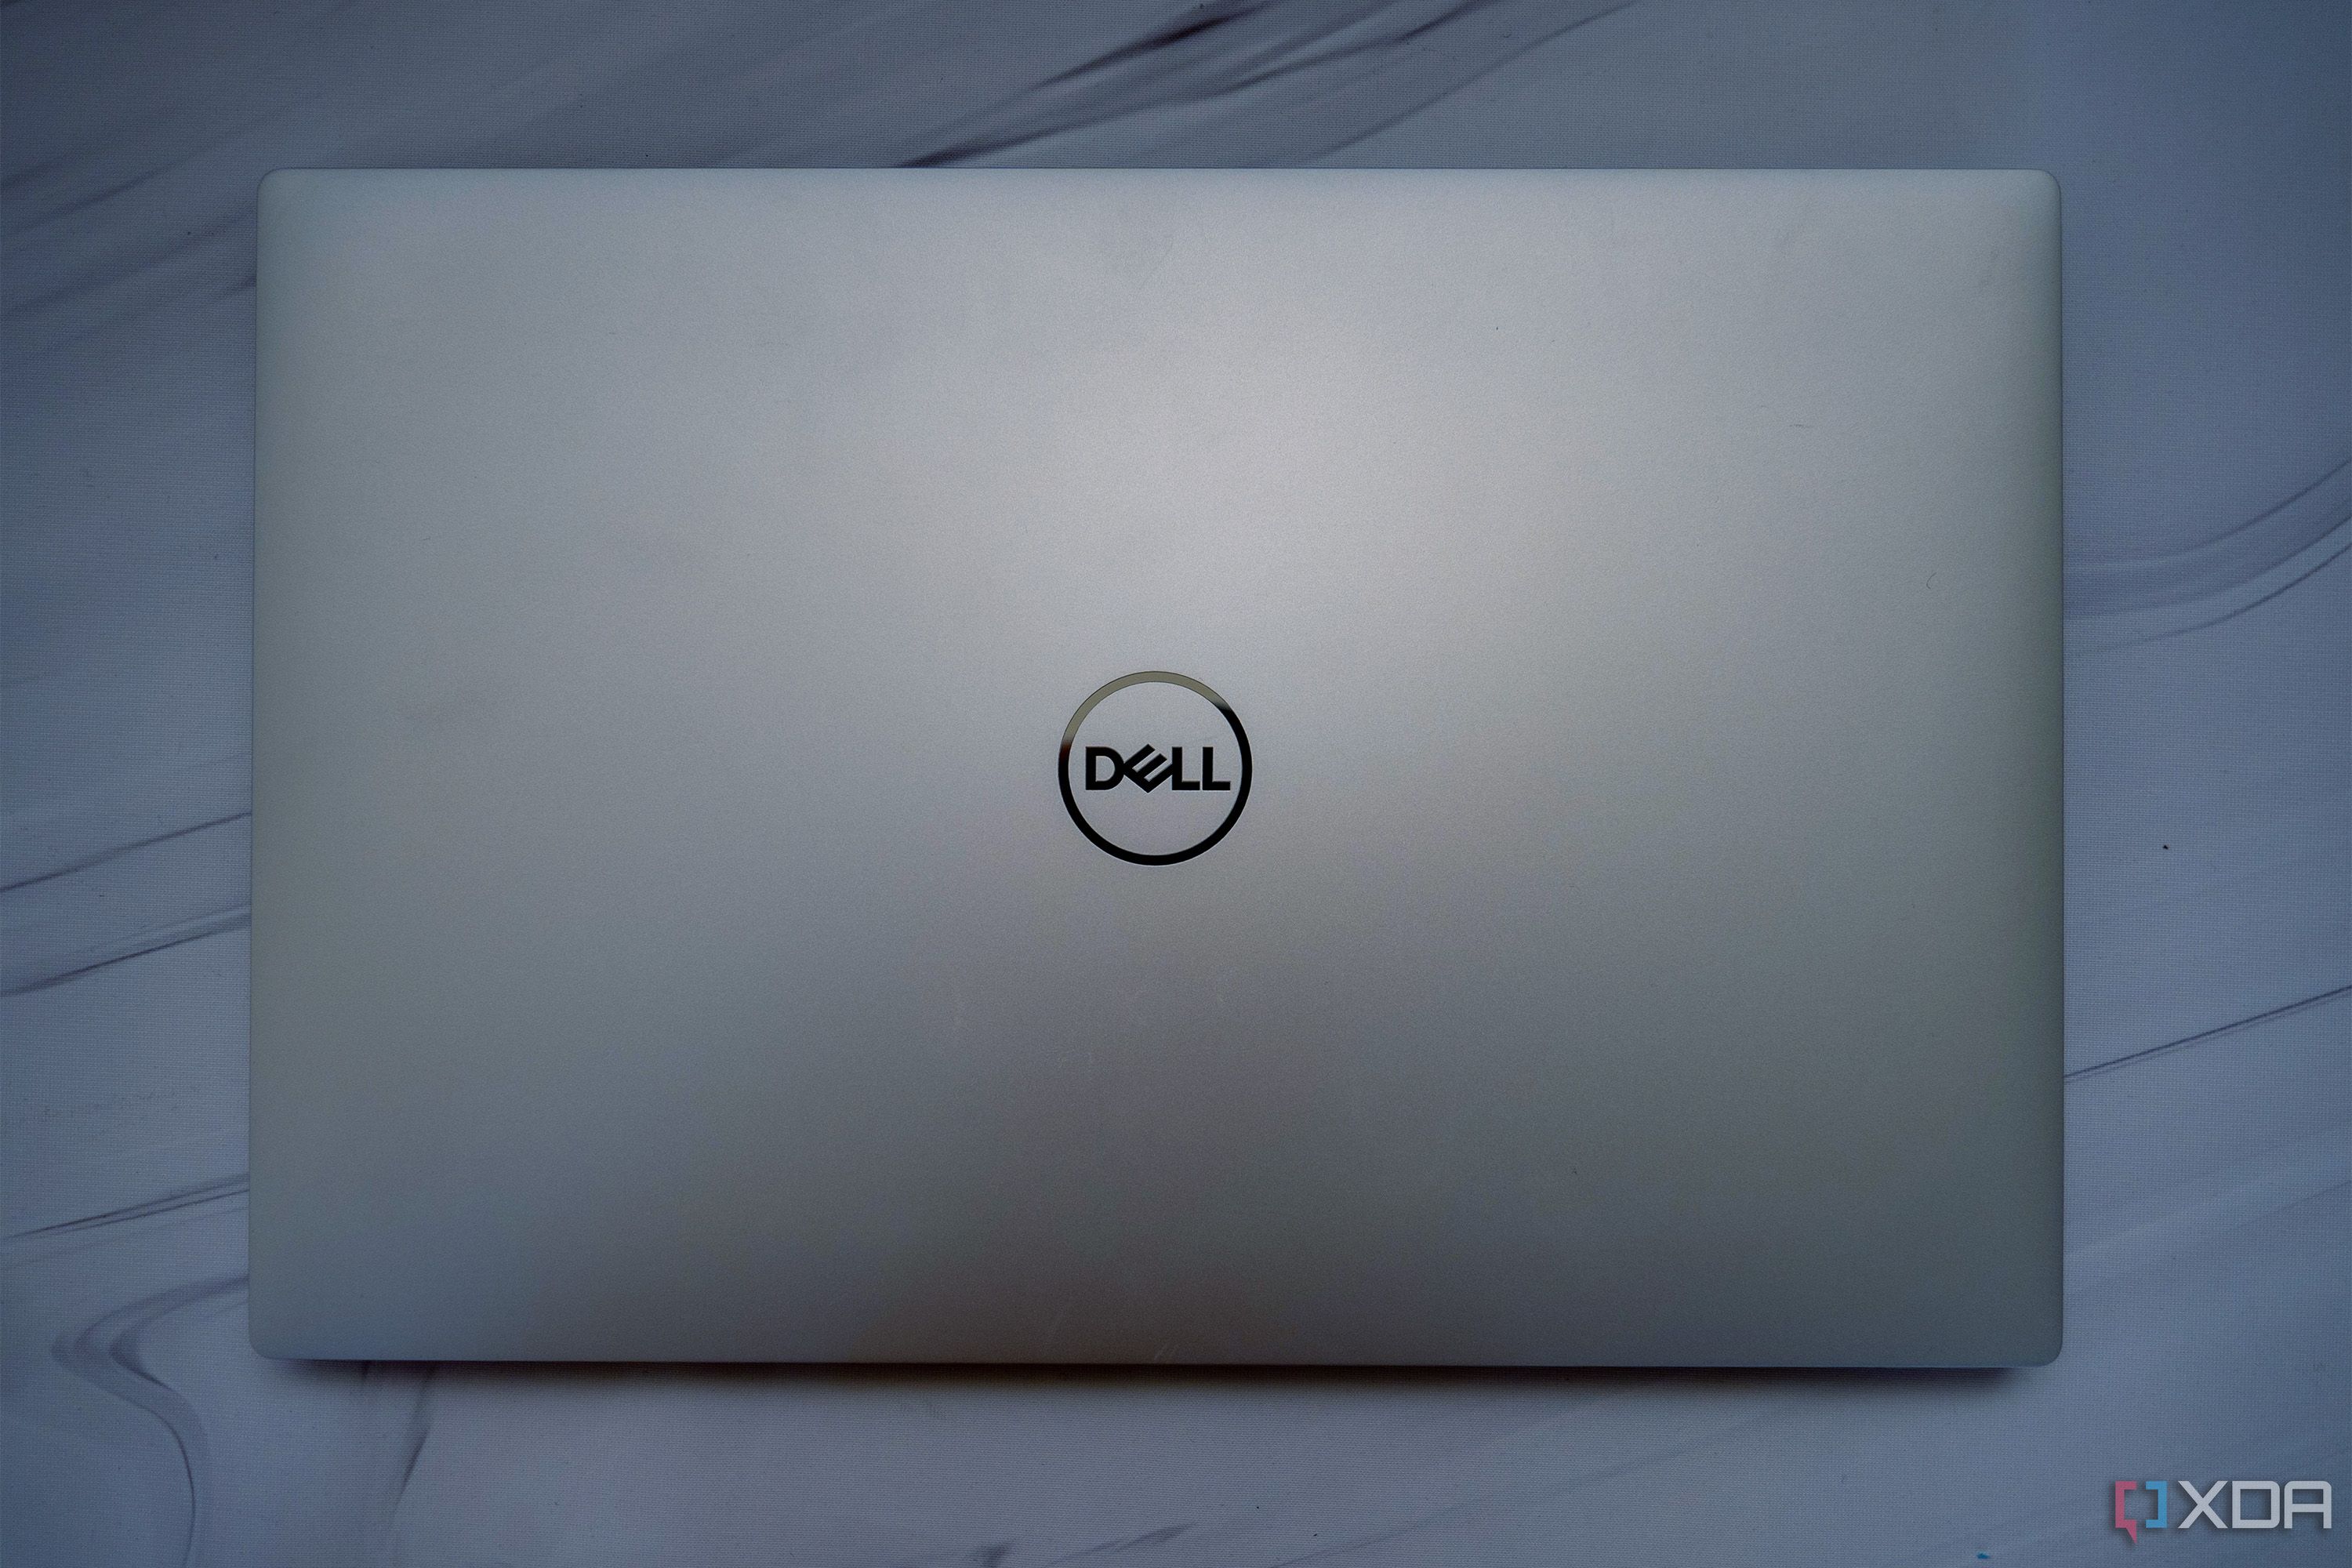 Top down view of Dell laptop in graphite